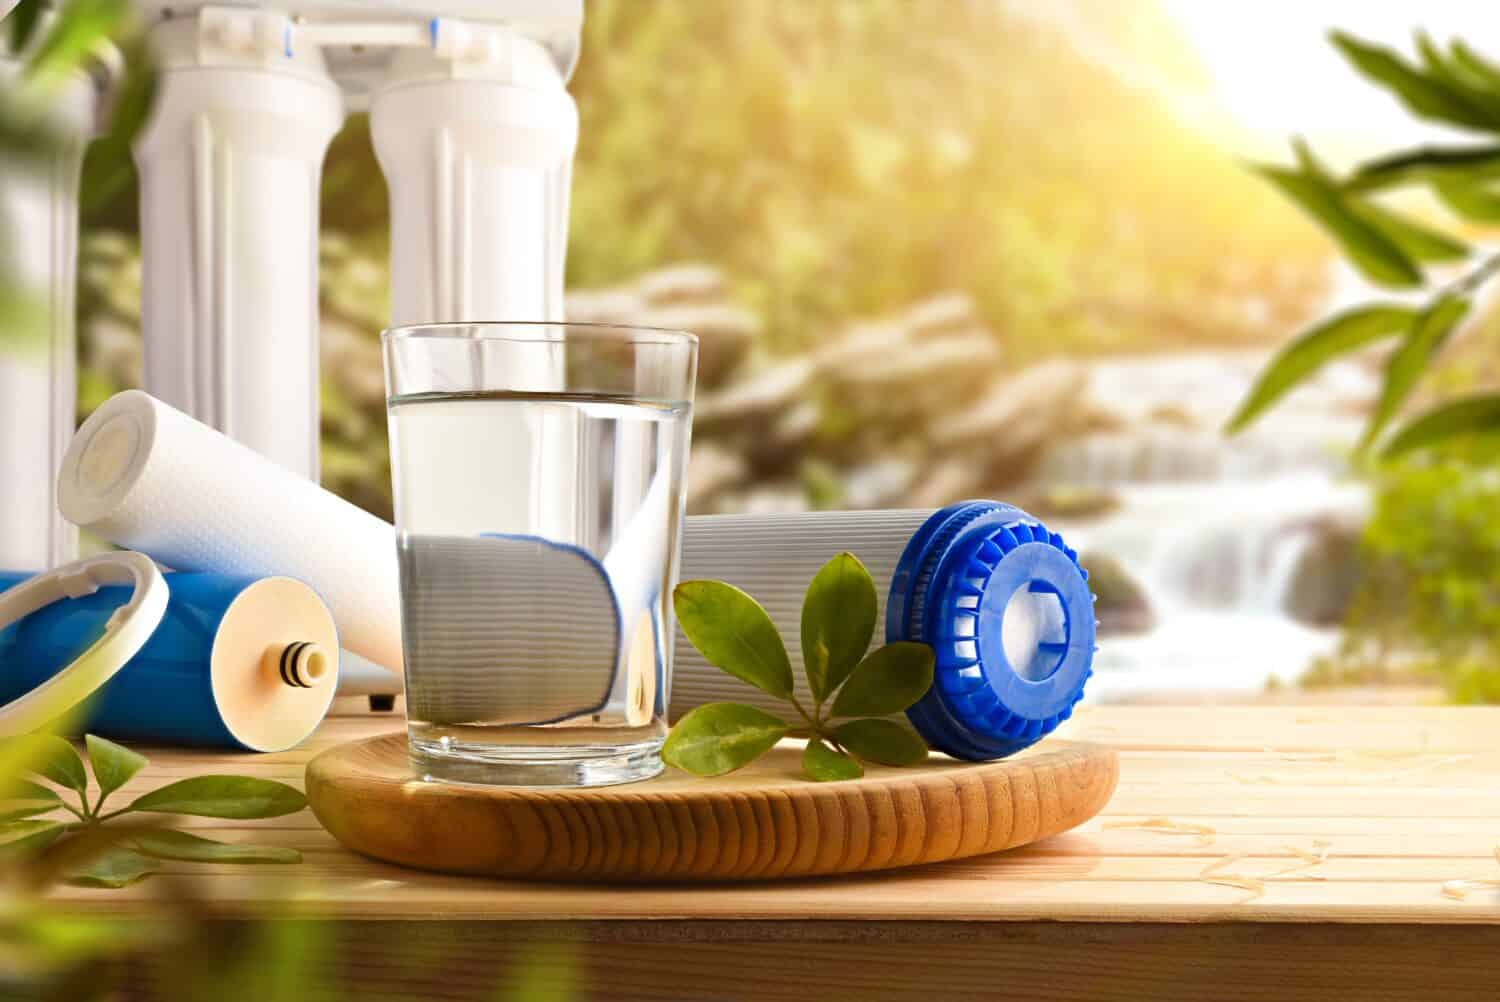 Glass of water purified by osmosis with environmentally friendly biodegradable filters on wooden slat table with nature background trees and waterfall. Front view. Horizontal composition.